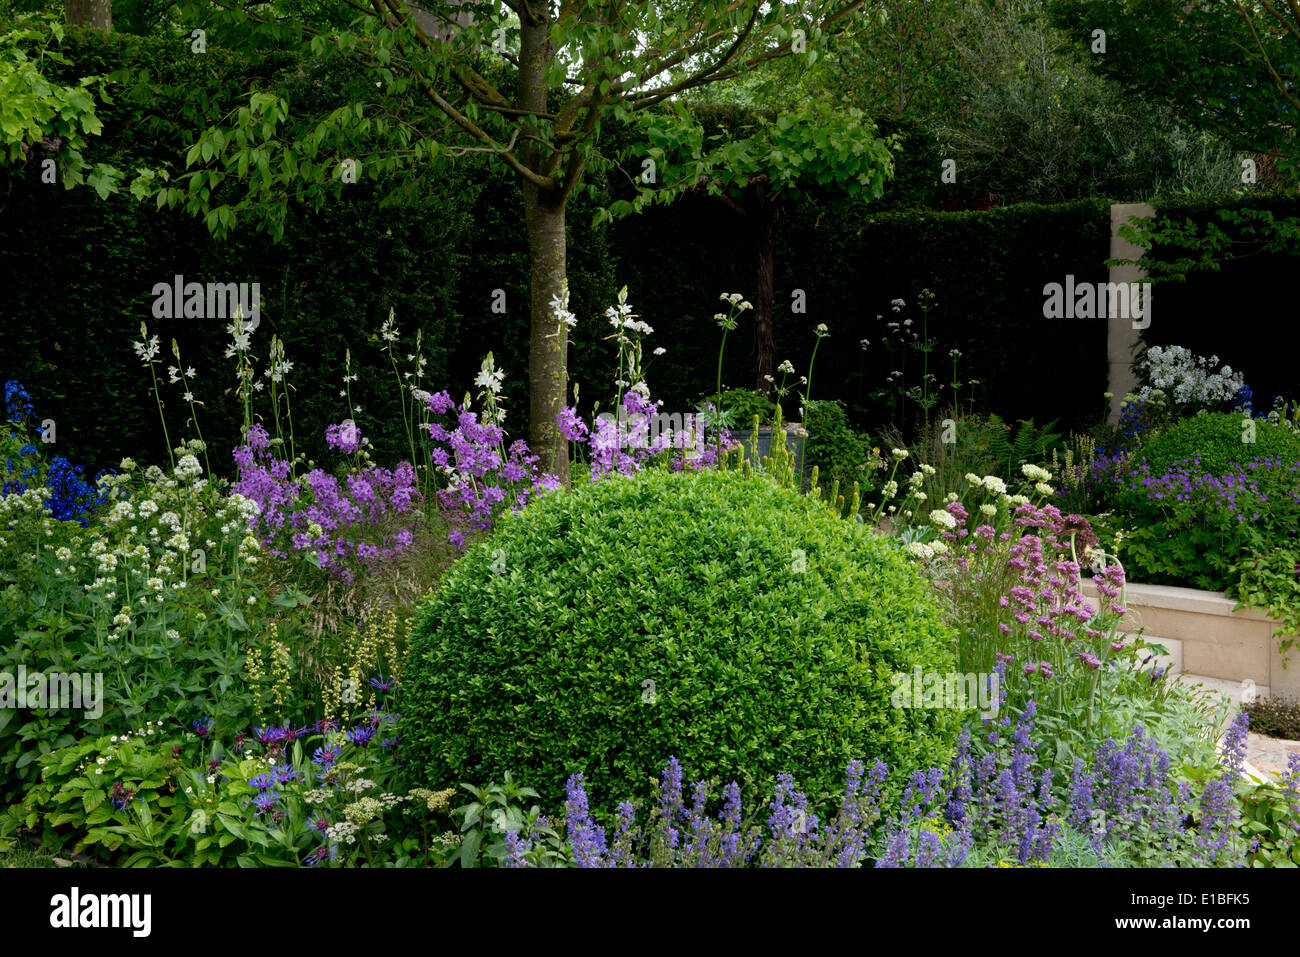 A close-up of a section of the M&G Garden designed by Cleve West and a gold medal winner at The Chelsea Flower Show 2014, London Stock Photo